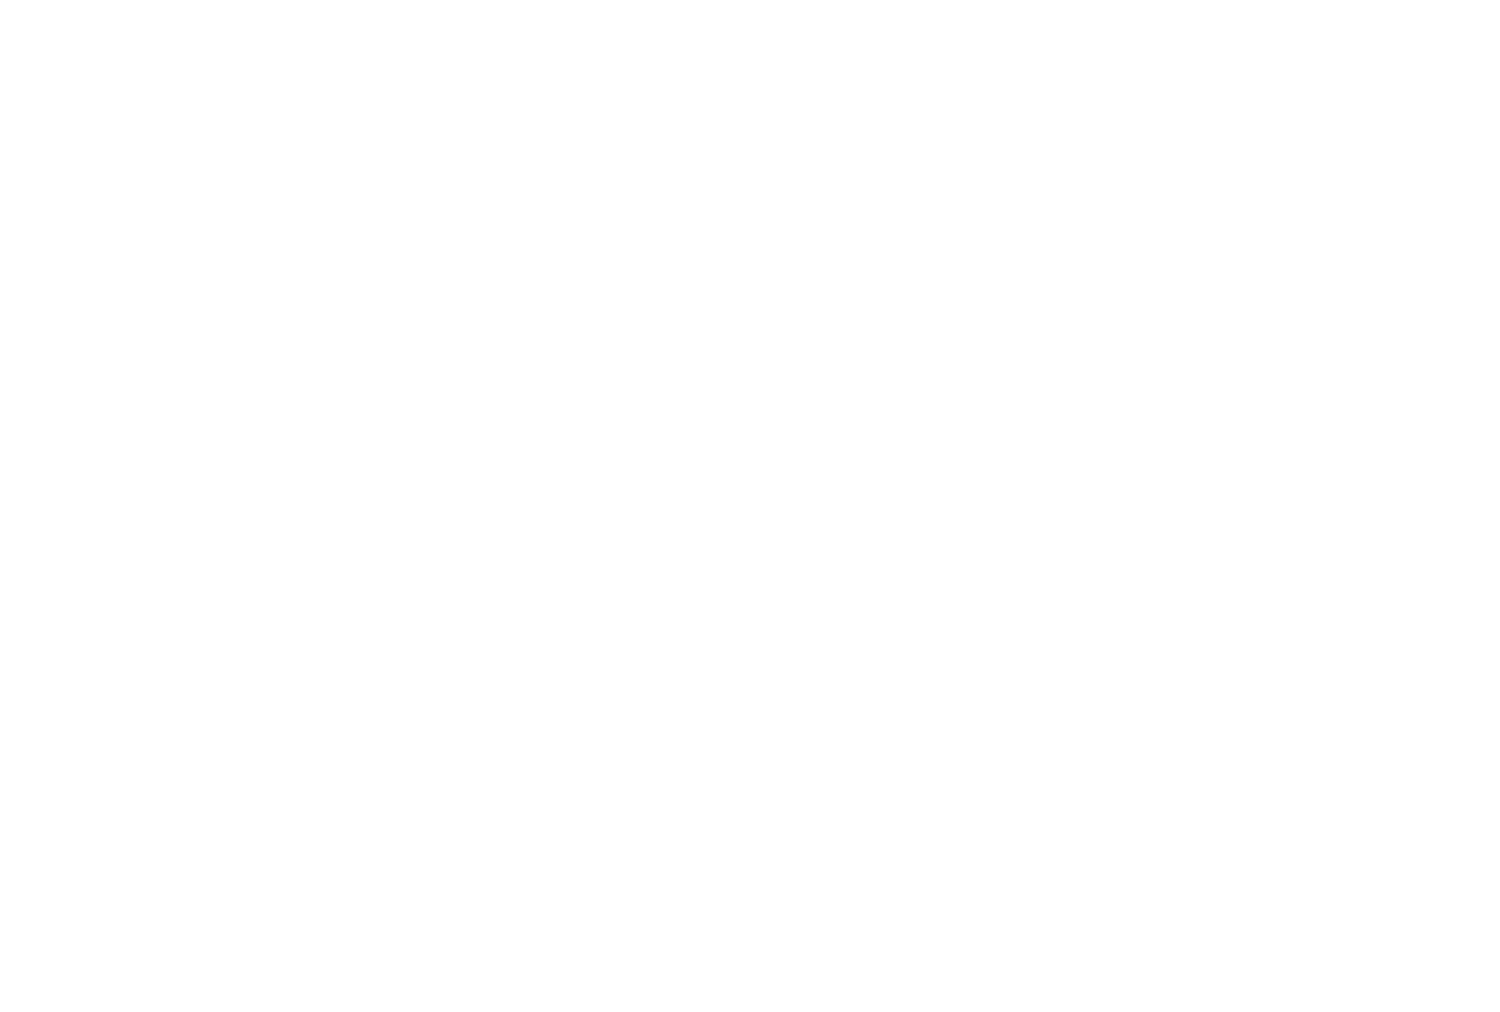 The Innovation Beehive